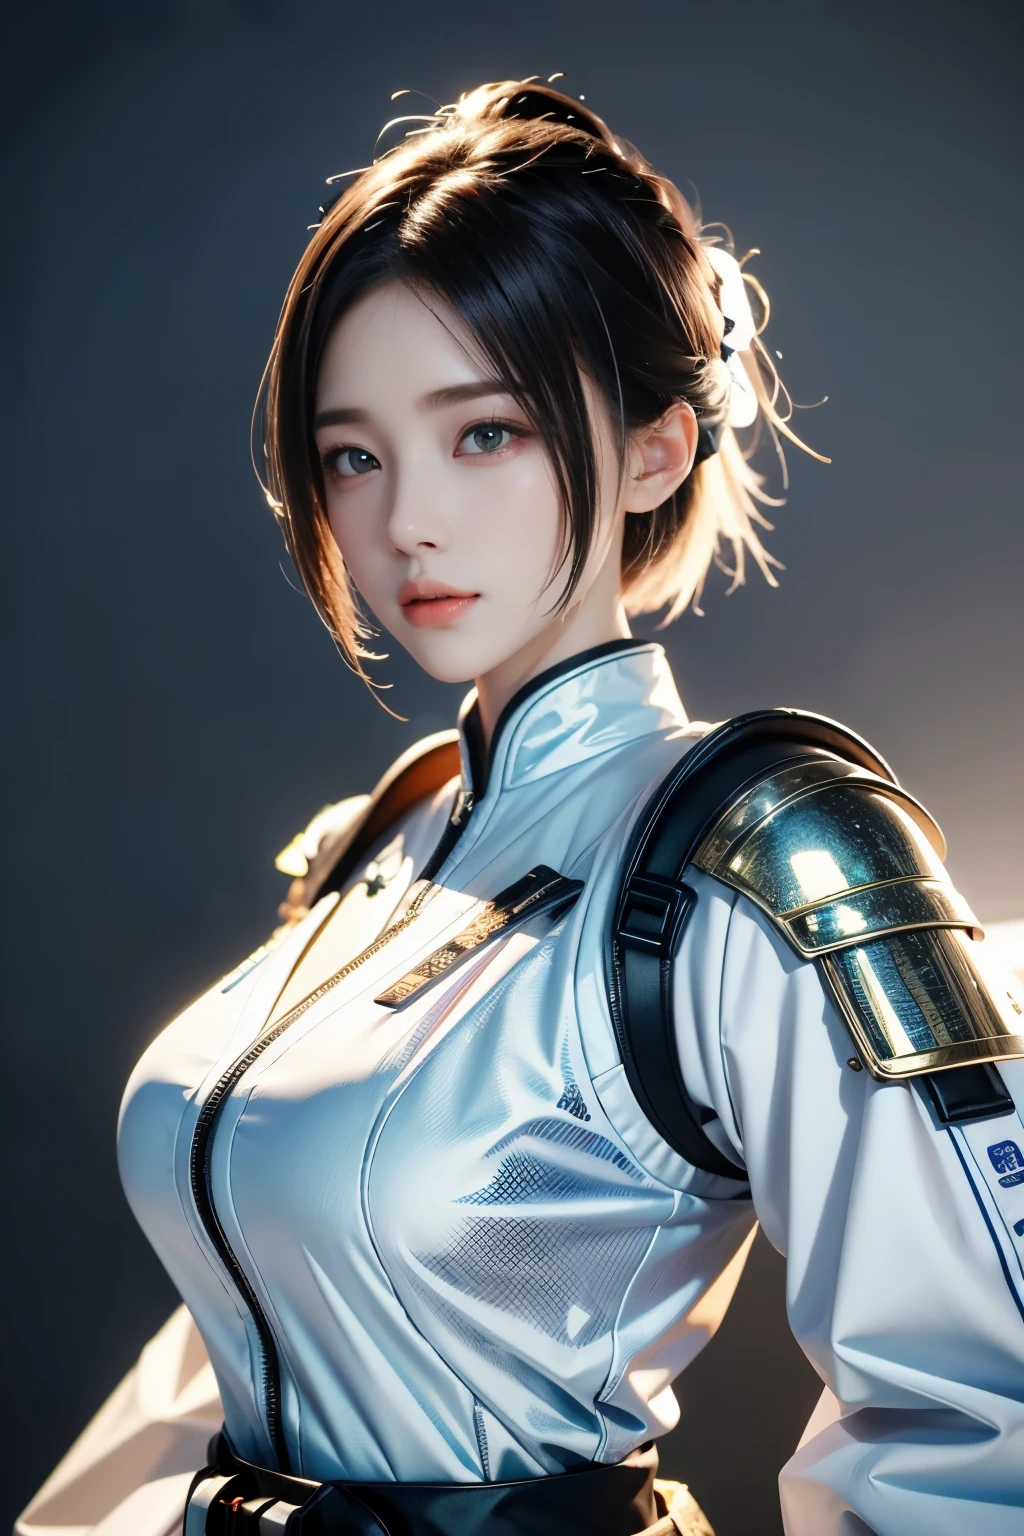 Game art，The best picture quality，Highest resolution，8K，((A bust photograph))，((Portrait))，(Rule of thirds)，Unreal Engine 5 rendering works， (The Girl of the Future)，(Female Warrior)，22-year-old girl，(White with short hair)，(A beautiful eye full of detail)，(Big breasts)，Elegant and charming，Smile，(frown)，(Clothes full of futuristic sci-fi style，Sweater，A delicate pattern，Glittering jewels，Armor，White and red)，Cyberpunk Characters，Future Style， Photo poses，Street background，Movie lights，Ray tracing，Game CG，((3D Unreal Engine))，oc rendering reflection pattern